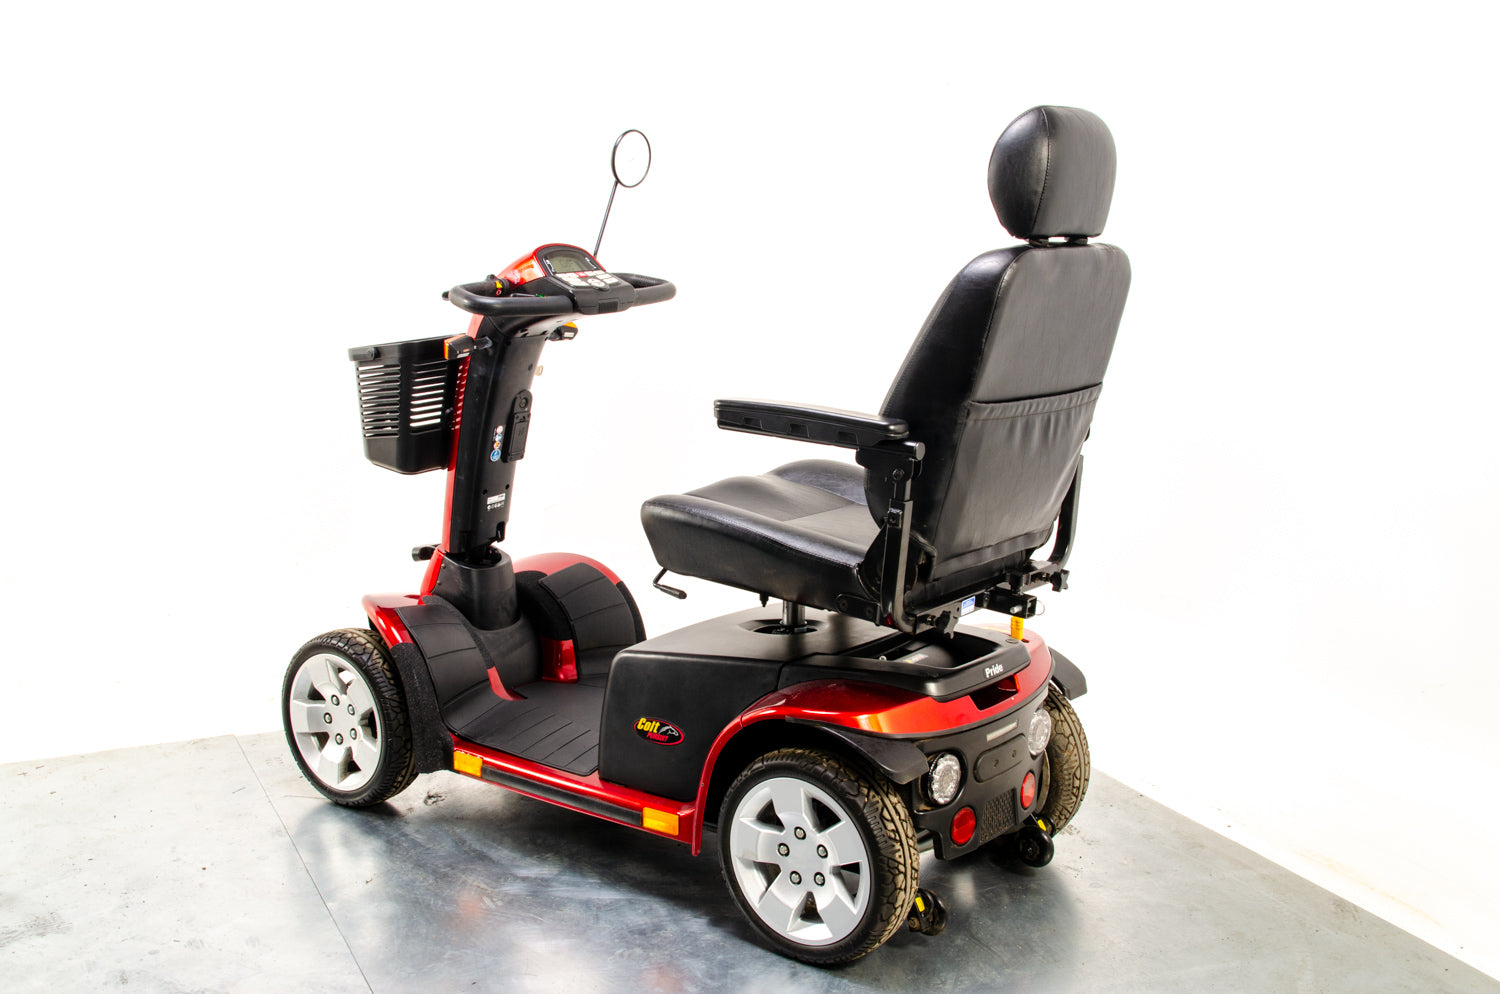 Pride Colt Pursuit Used Mobility Scooter 8mph All-Terrain Transportable Large Off-Road Road Legal Red 13446